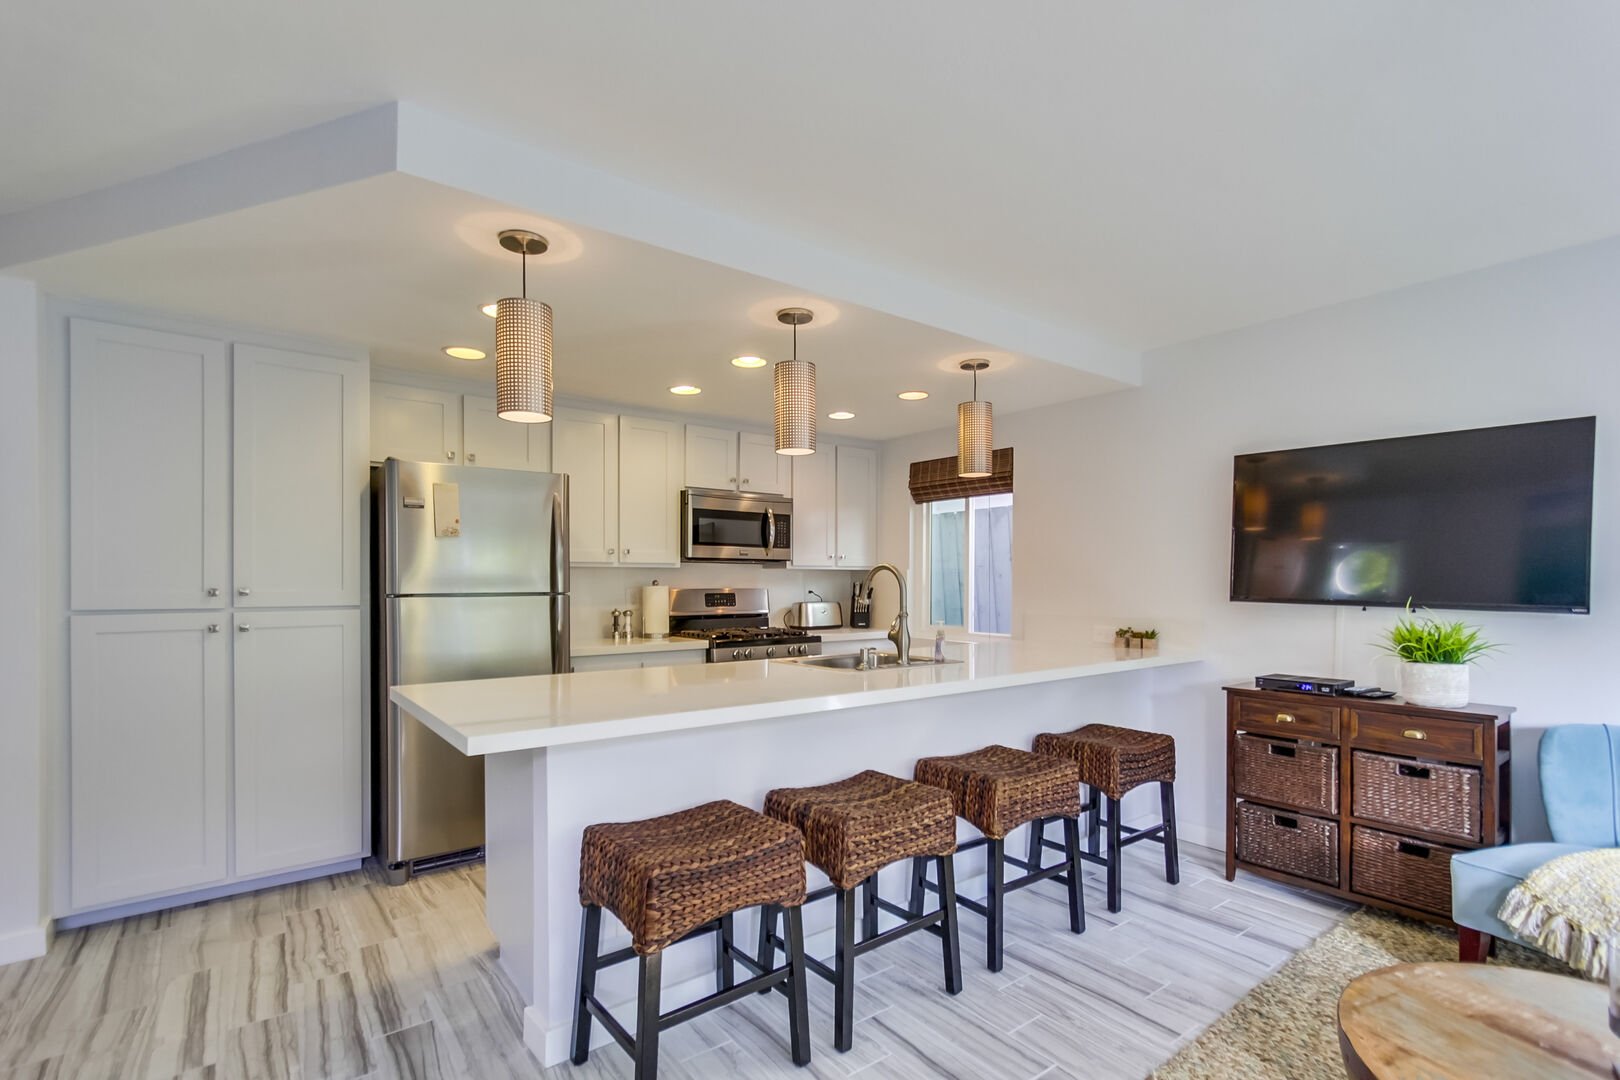 Open California-style kitchen with recessed lighting, bar seating for 4, and stainless steel appliances